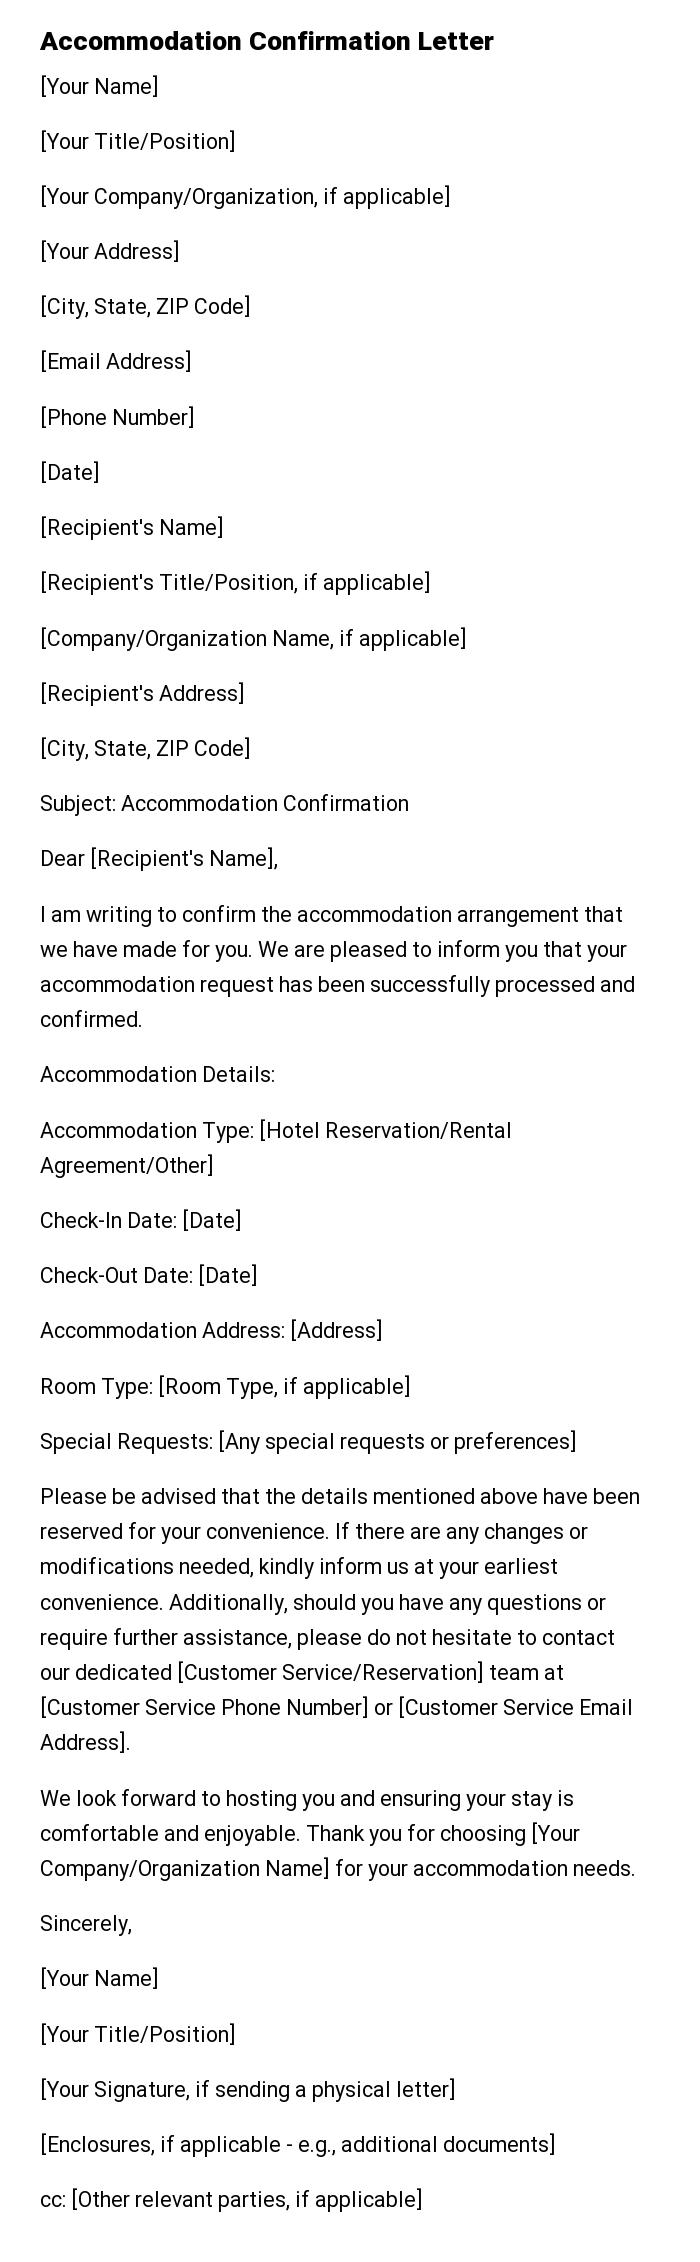 Accommodation Confirmation Letter